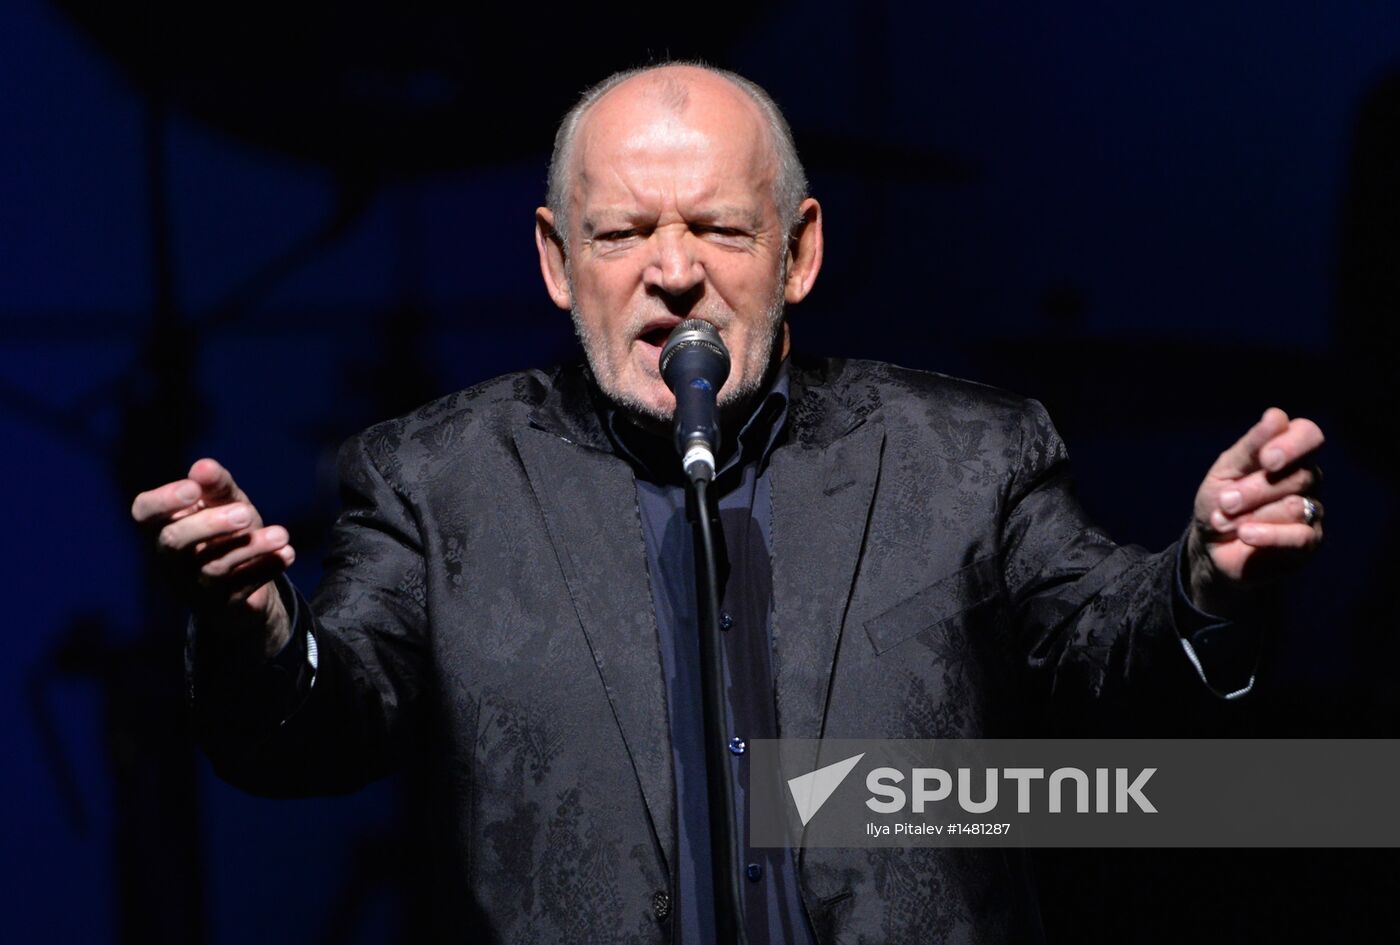 Joe Cocker goves concert in Moscow